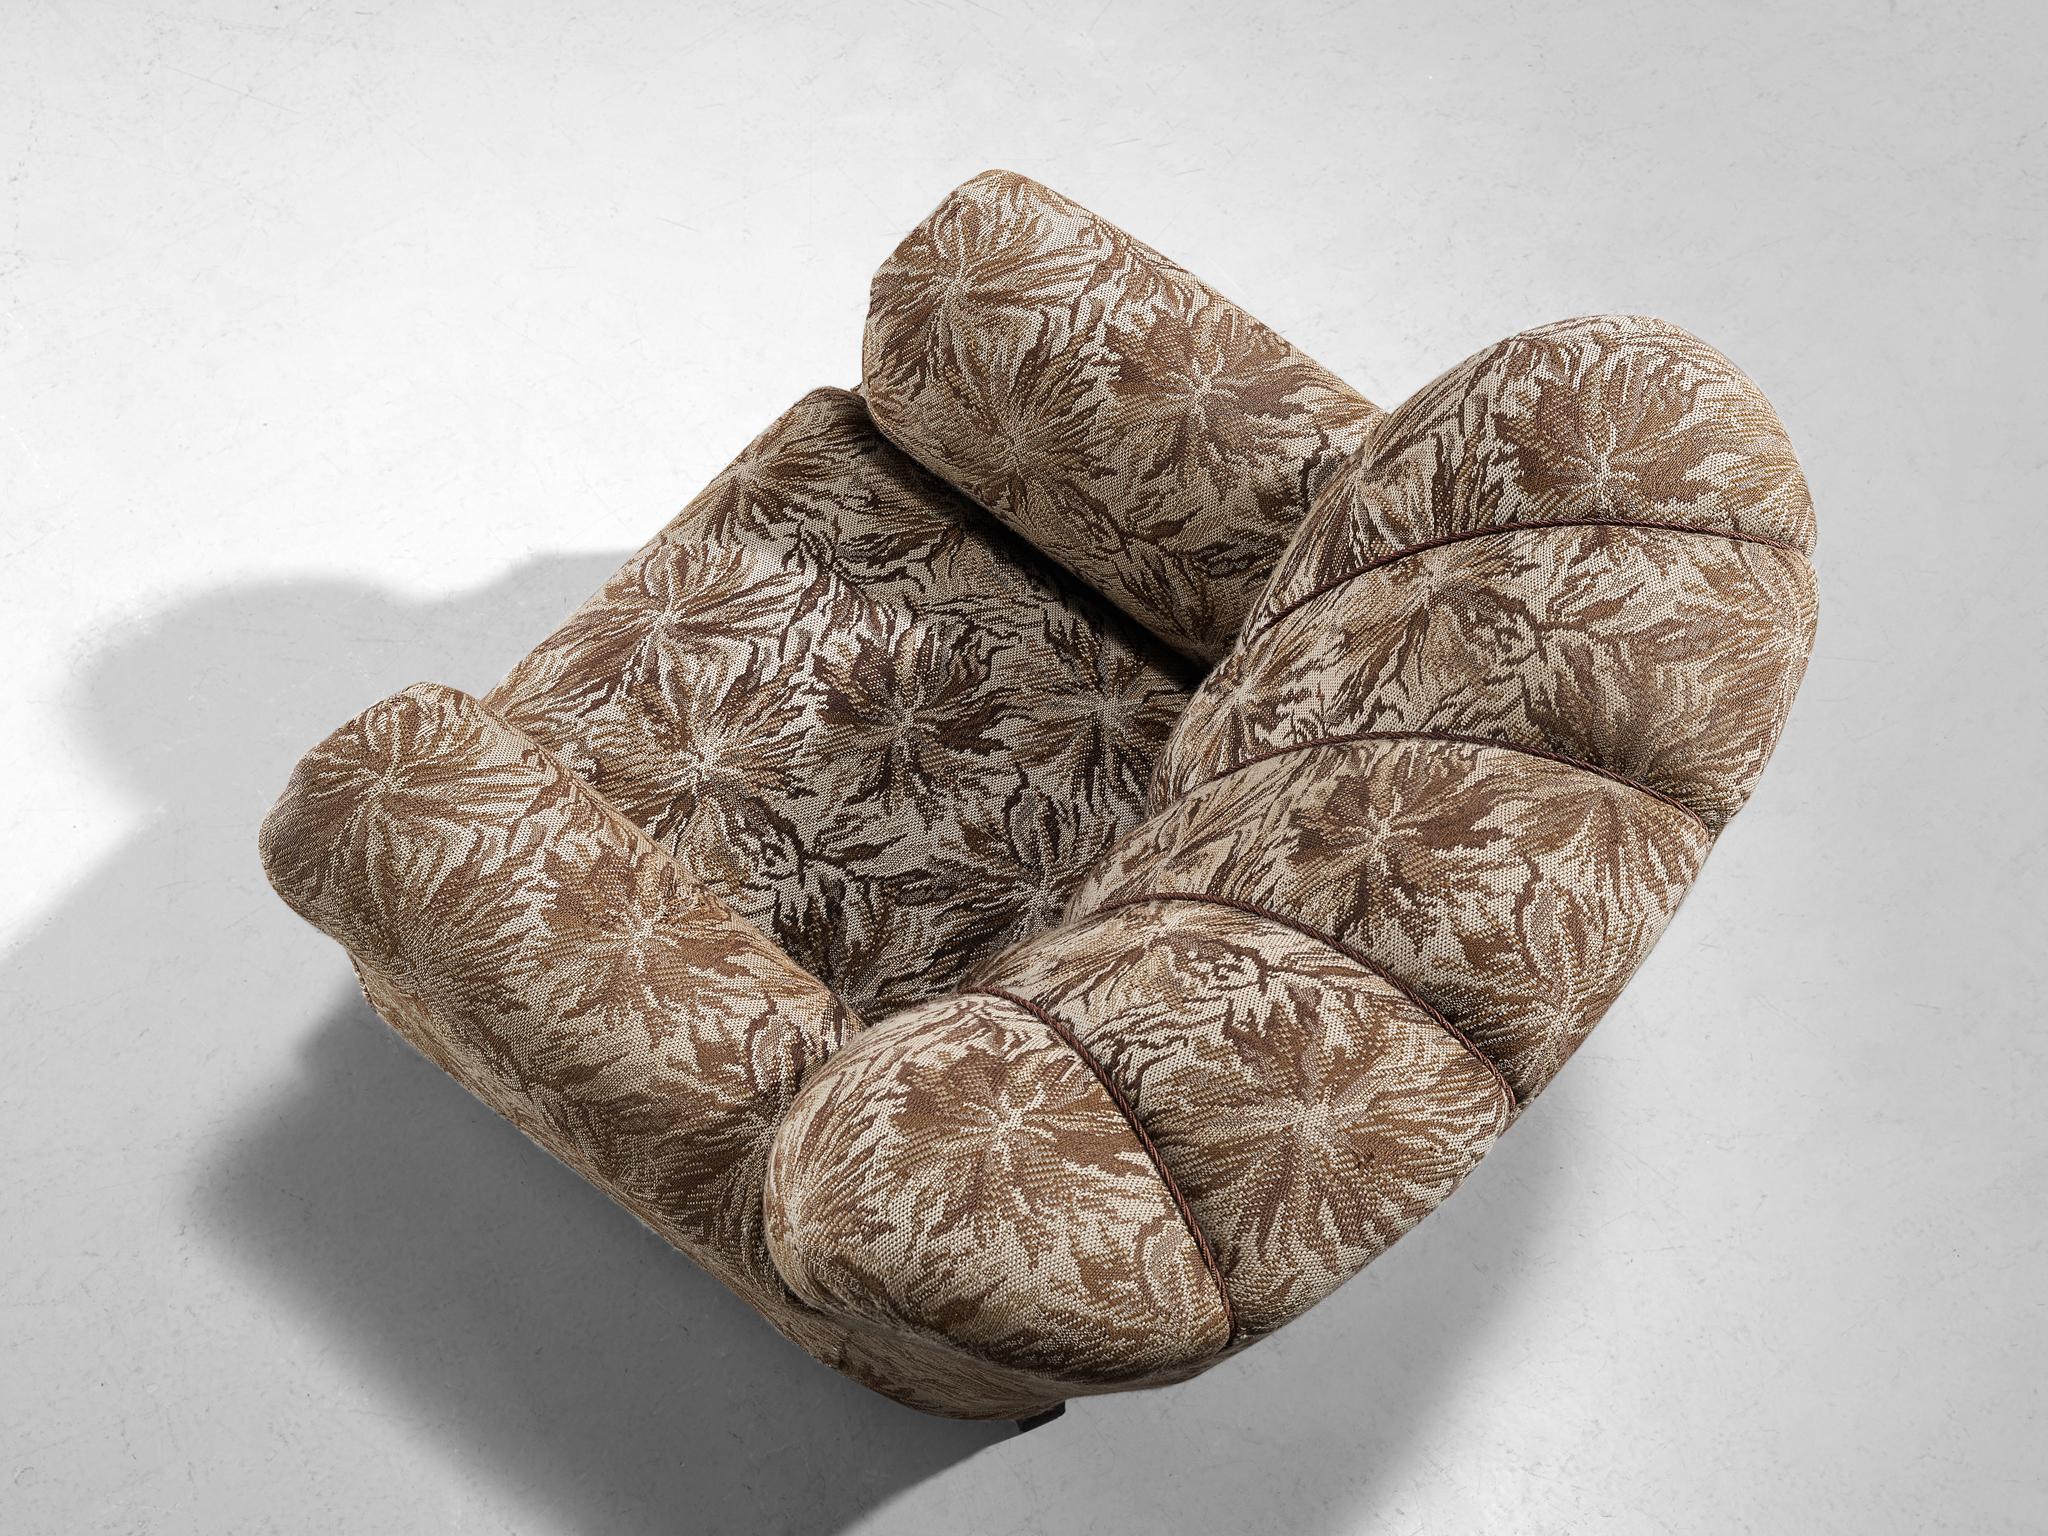 Lounge Chair in Brown and Beige Floral Upholstery